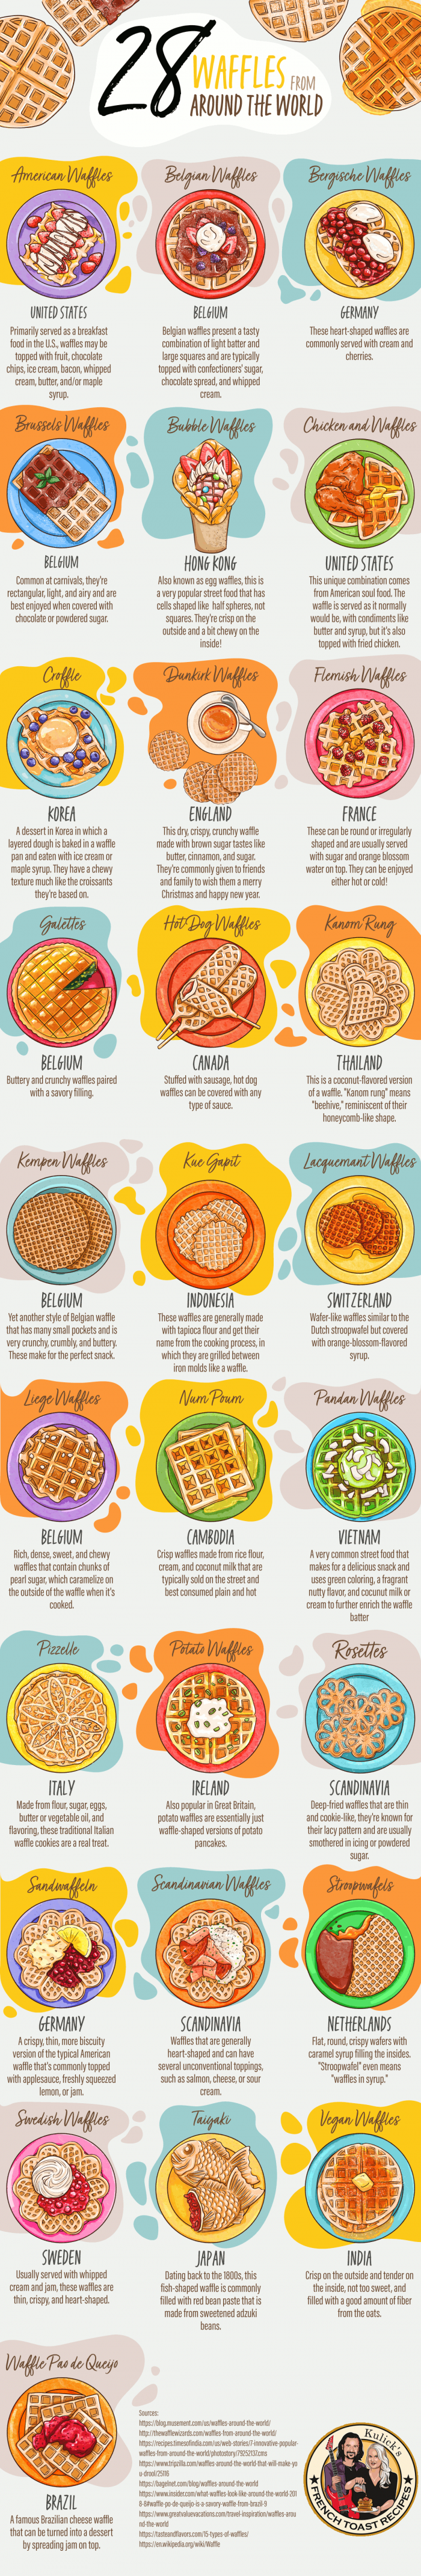 Waffles From Around the World